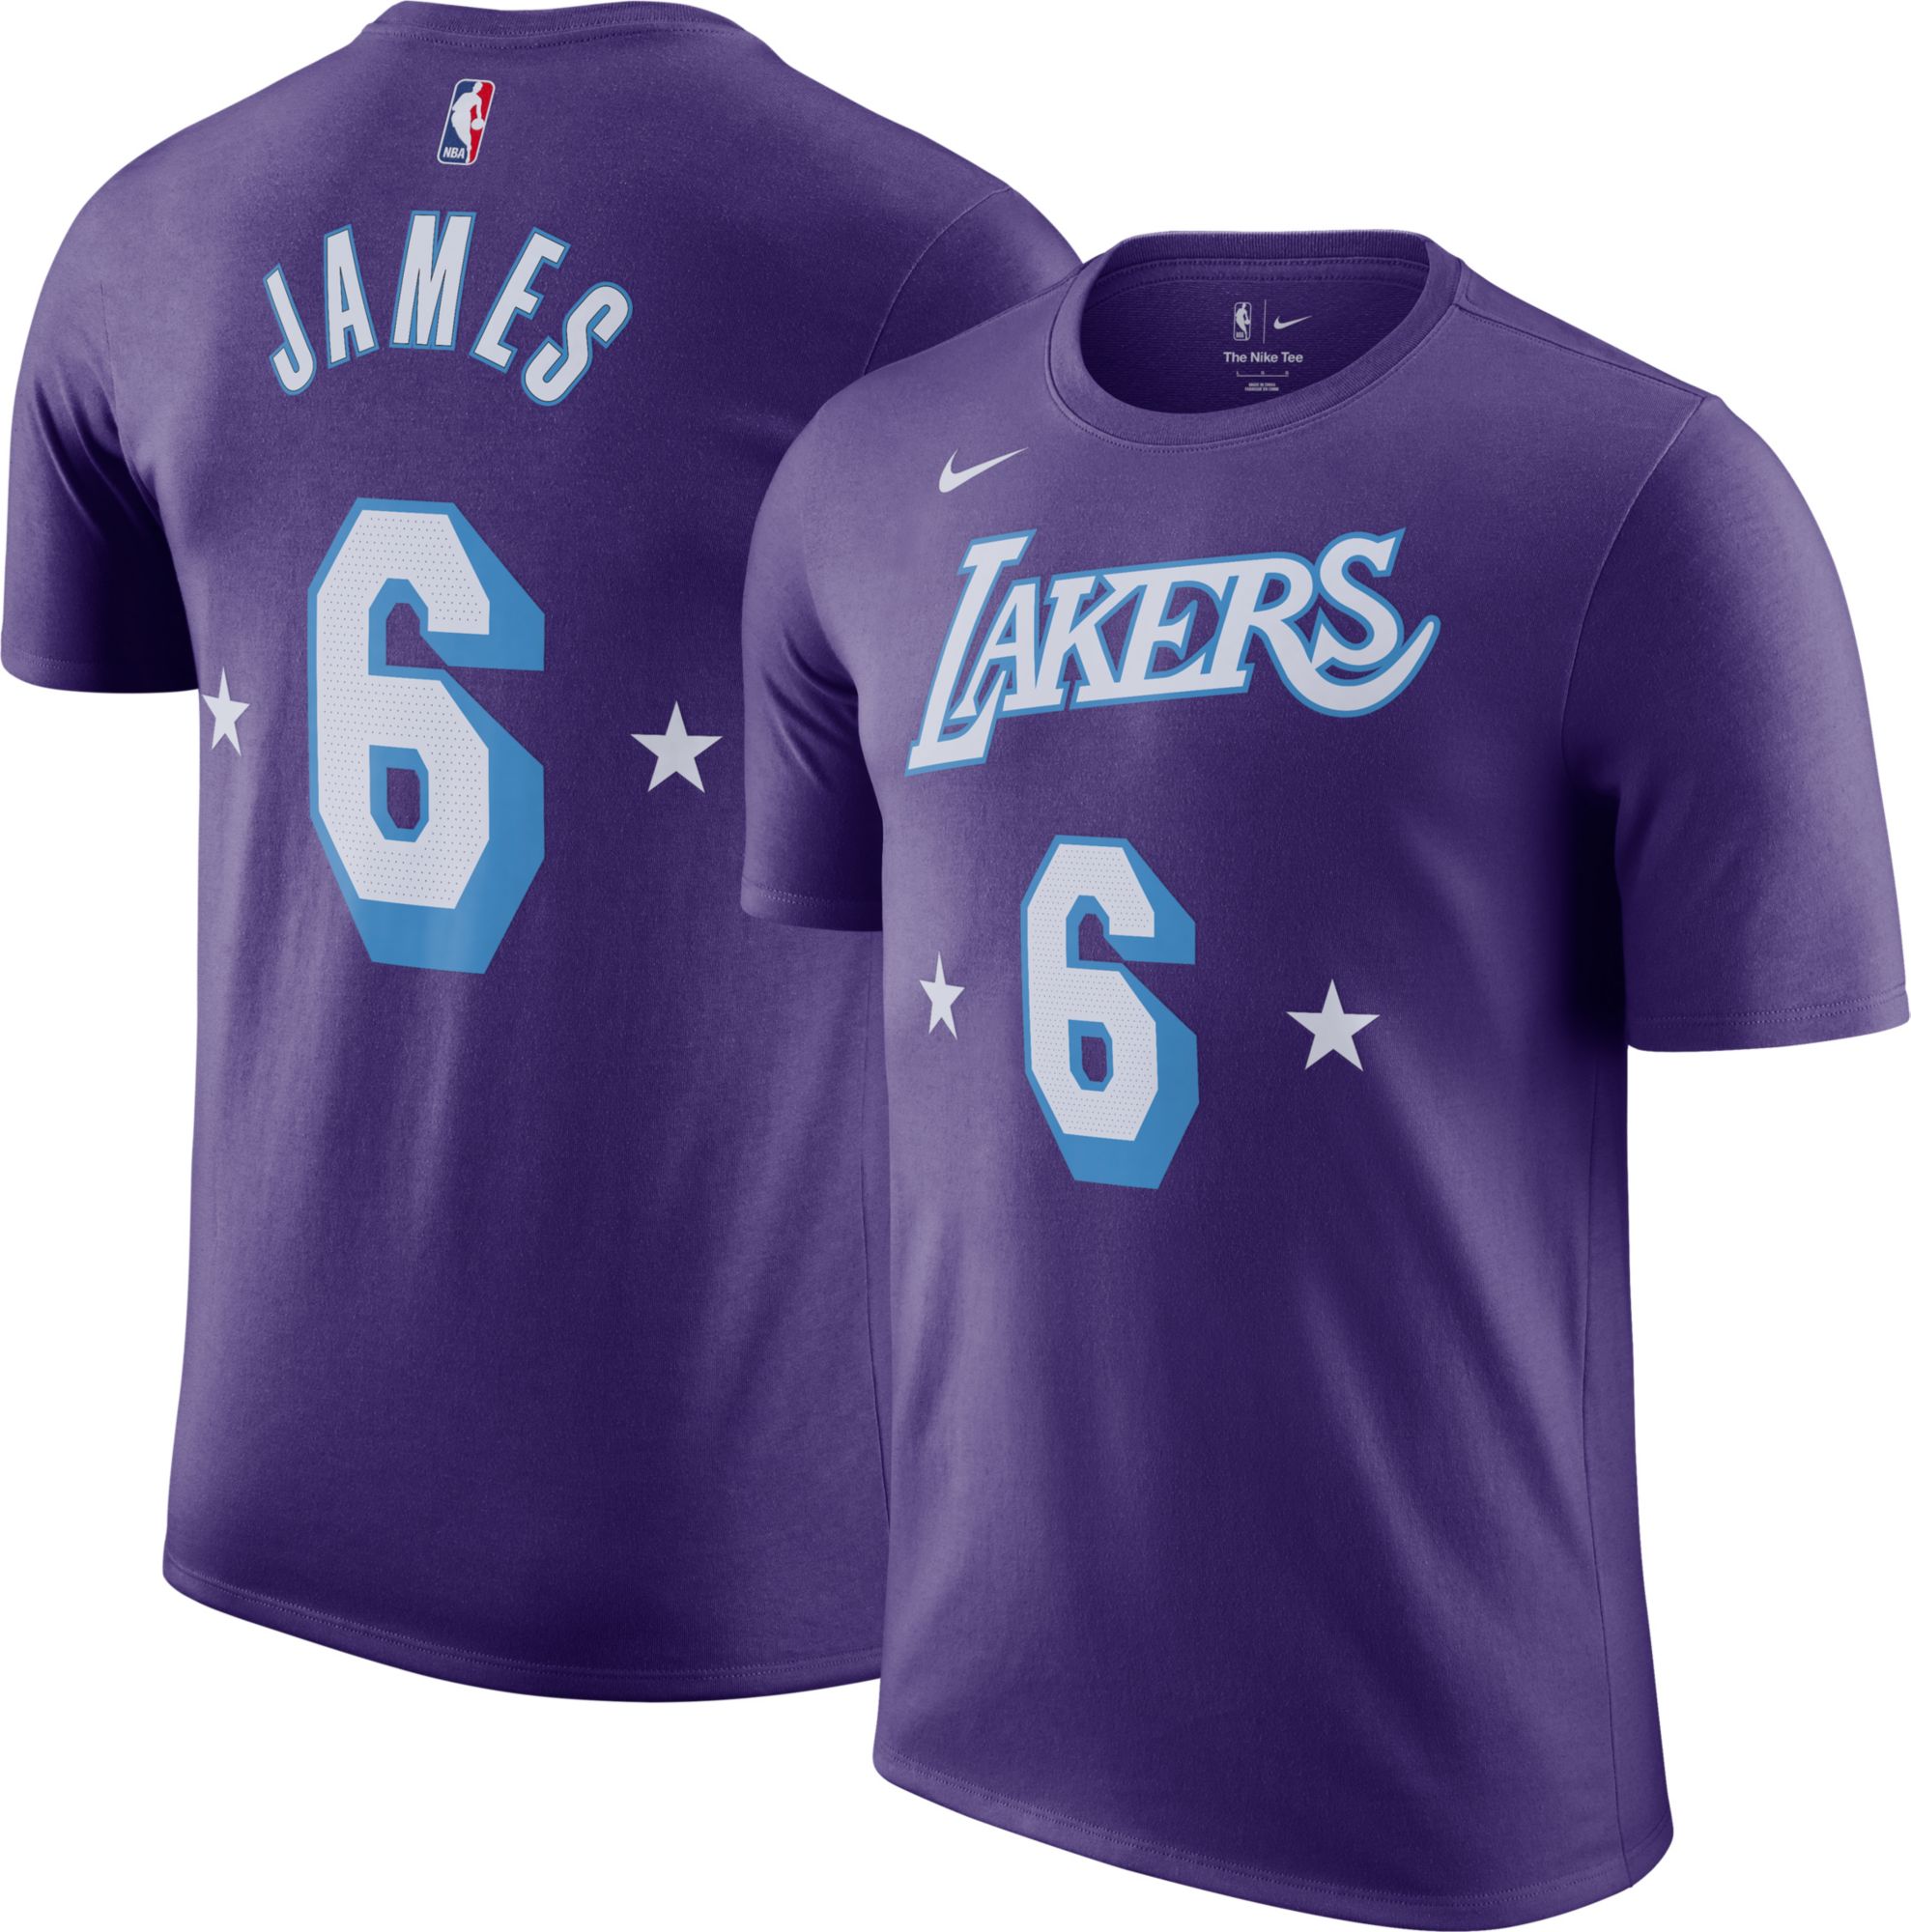 2021-22 Los Angeles Lakers LeBron James #6 Earned Edition Jersey